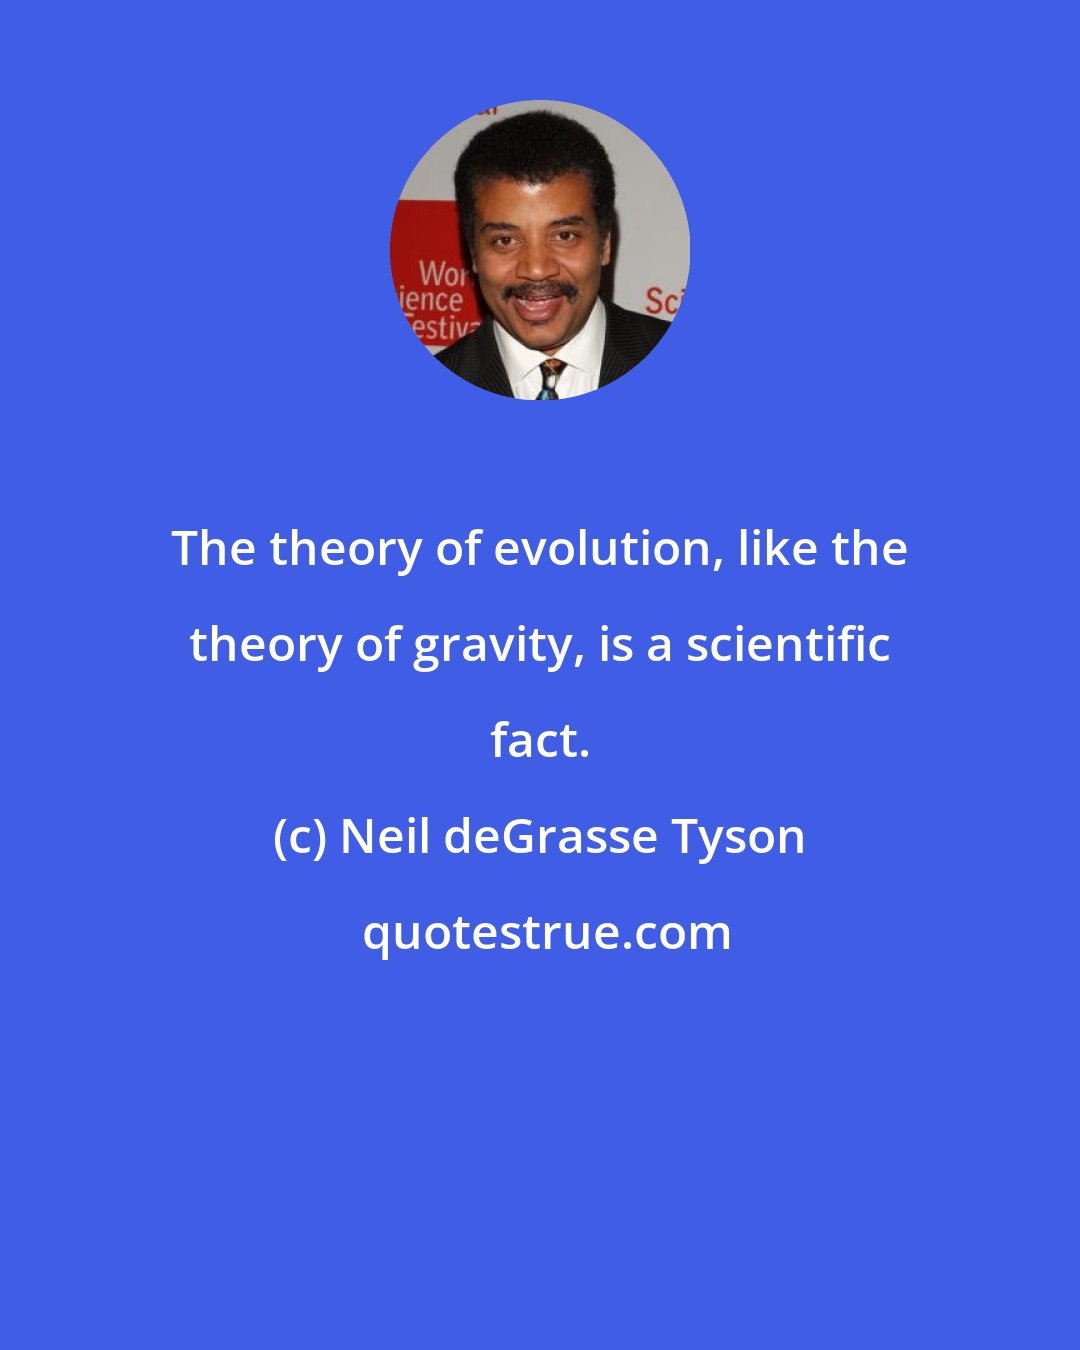 Neil deGrasse Tyson: The theory of evolution, like the theory of gravity, is a scientific fact.